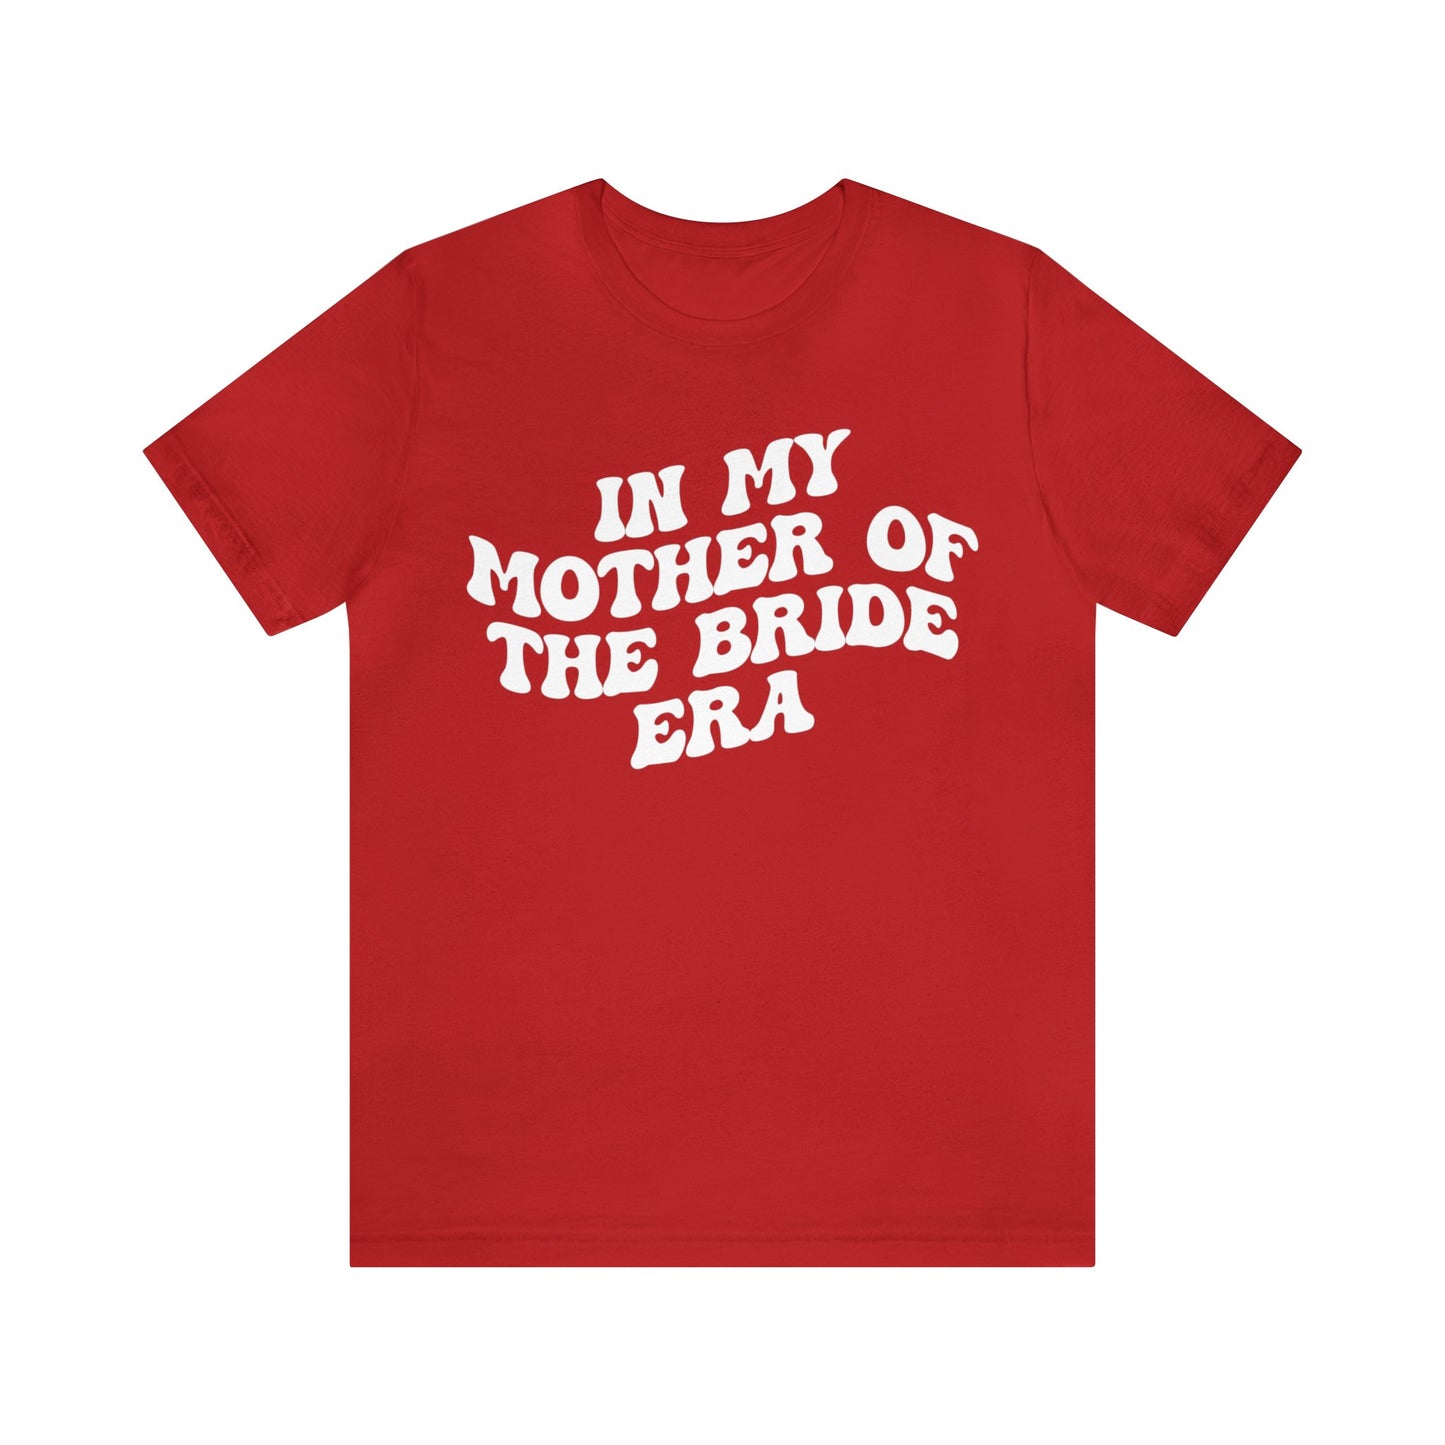 In My Mother of the Bride Era Shirt, Bridal Party Shirt for Mom, Retro Wedding Shirt for Mom, Engagement Shirt, Cute Wedding Gift, T1351